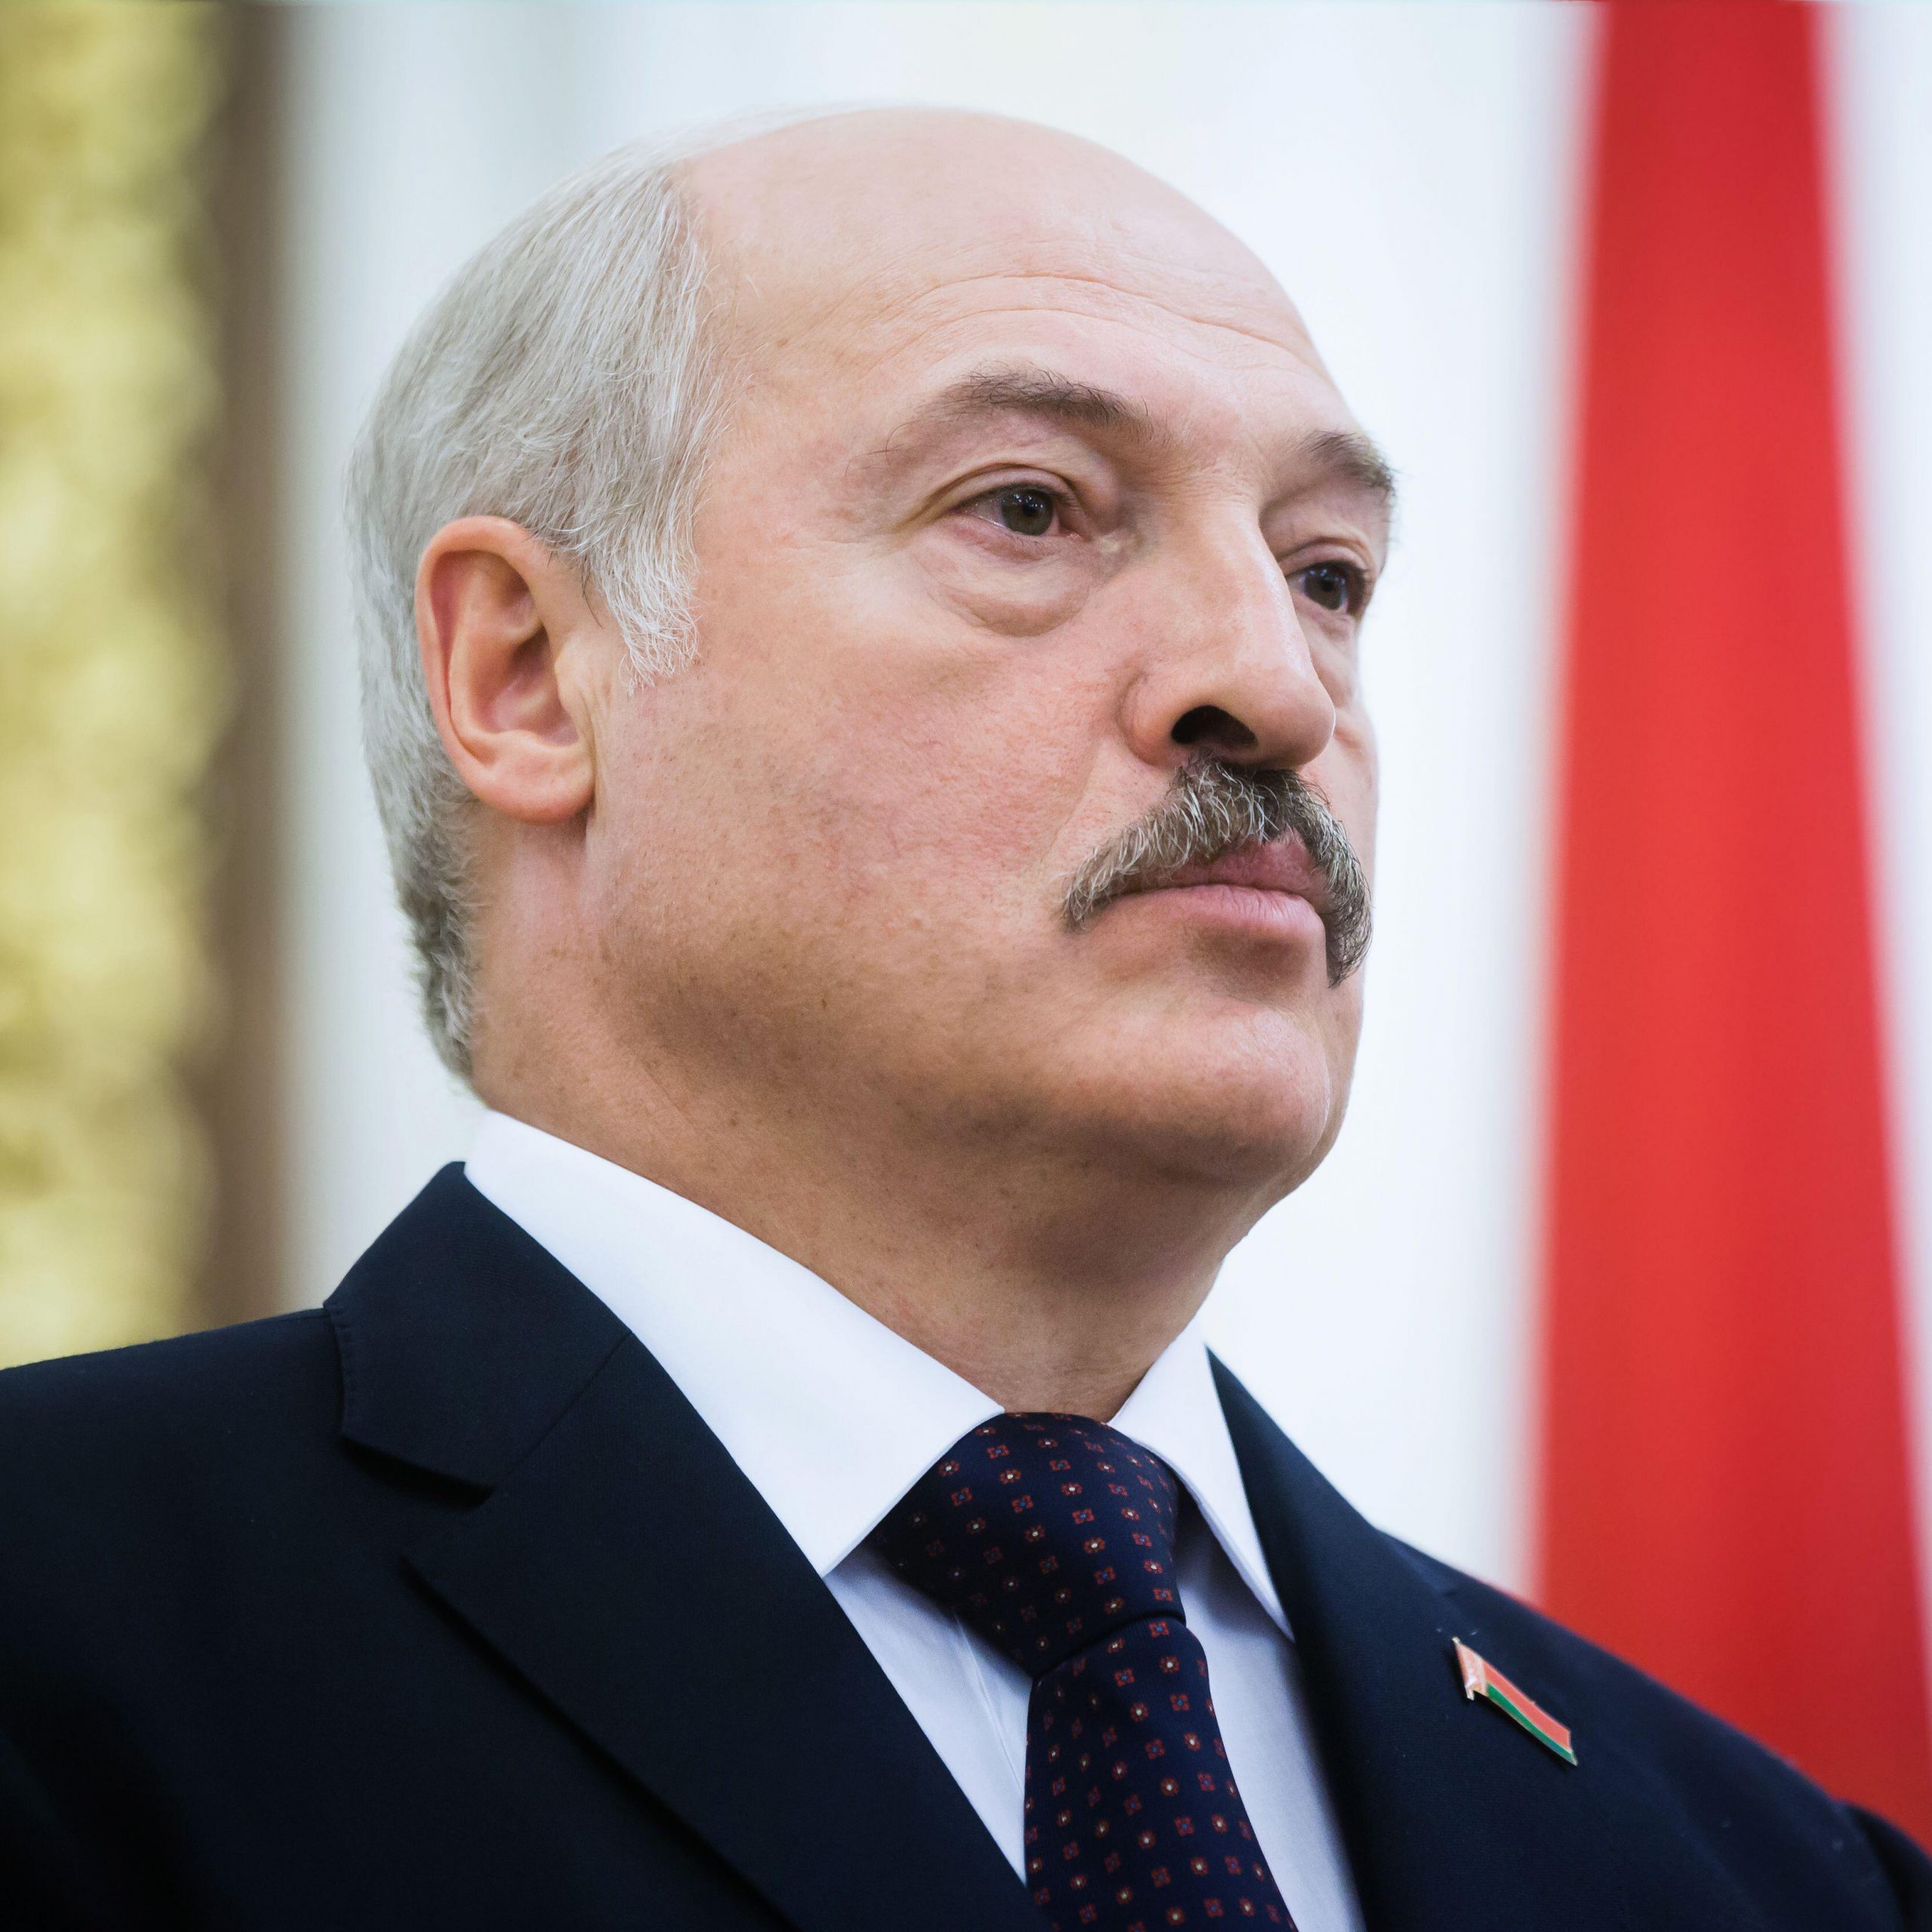 Let’s cut Lukashenko’s financial support